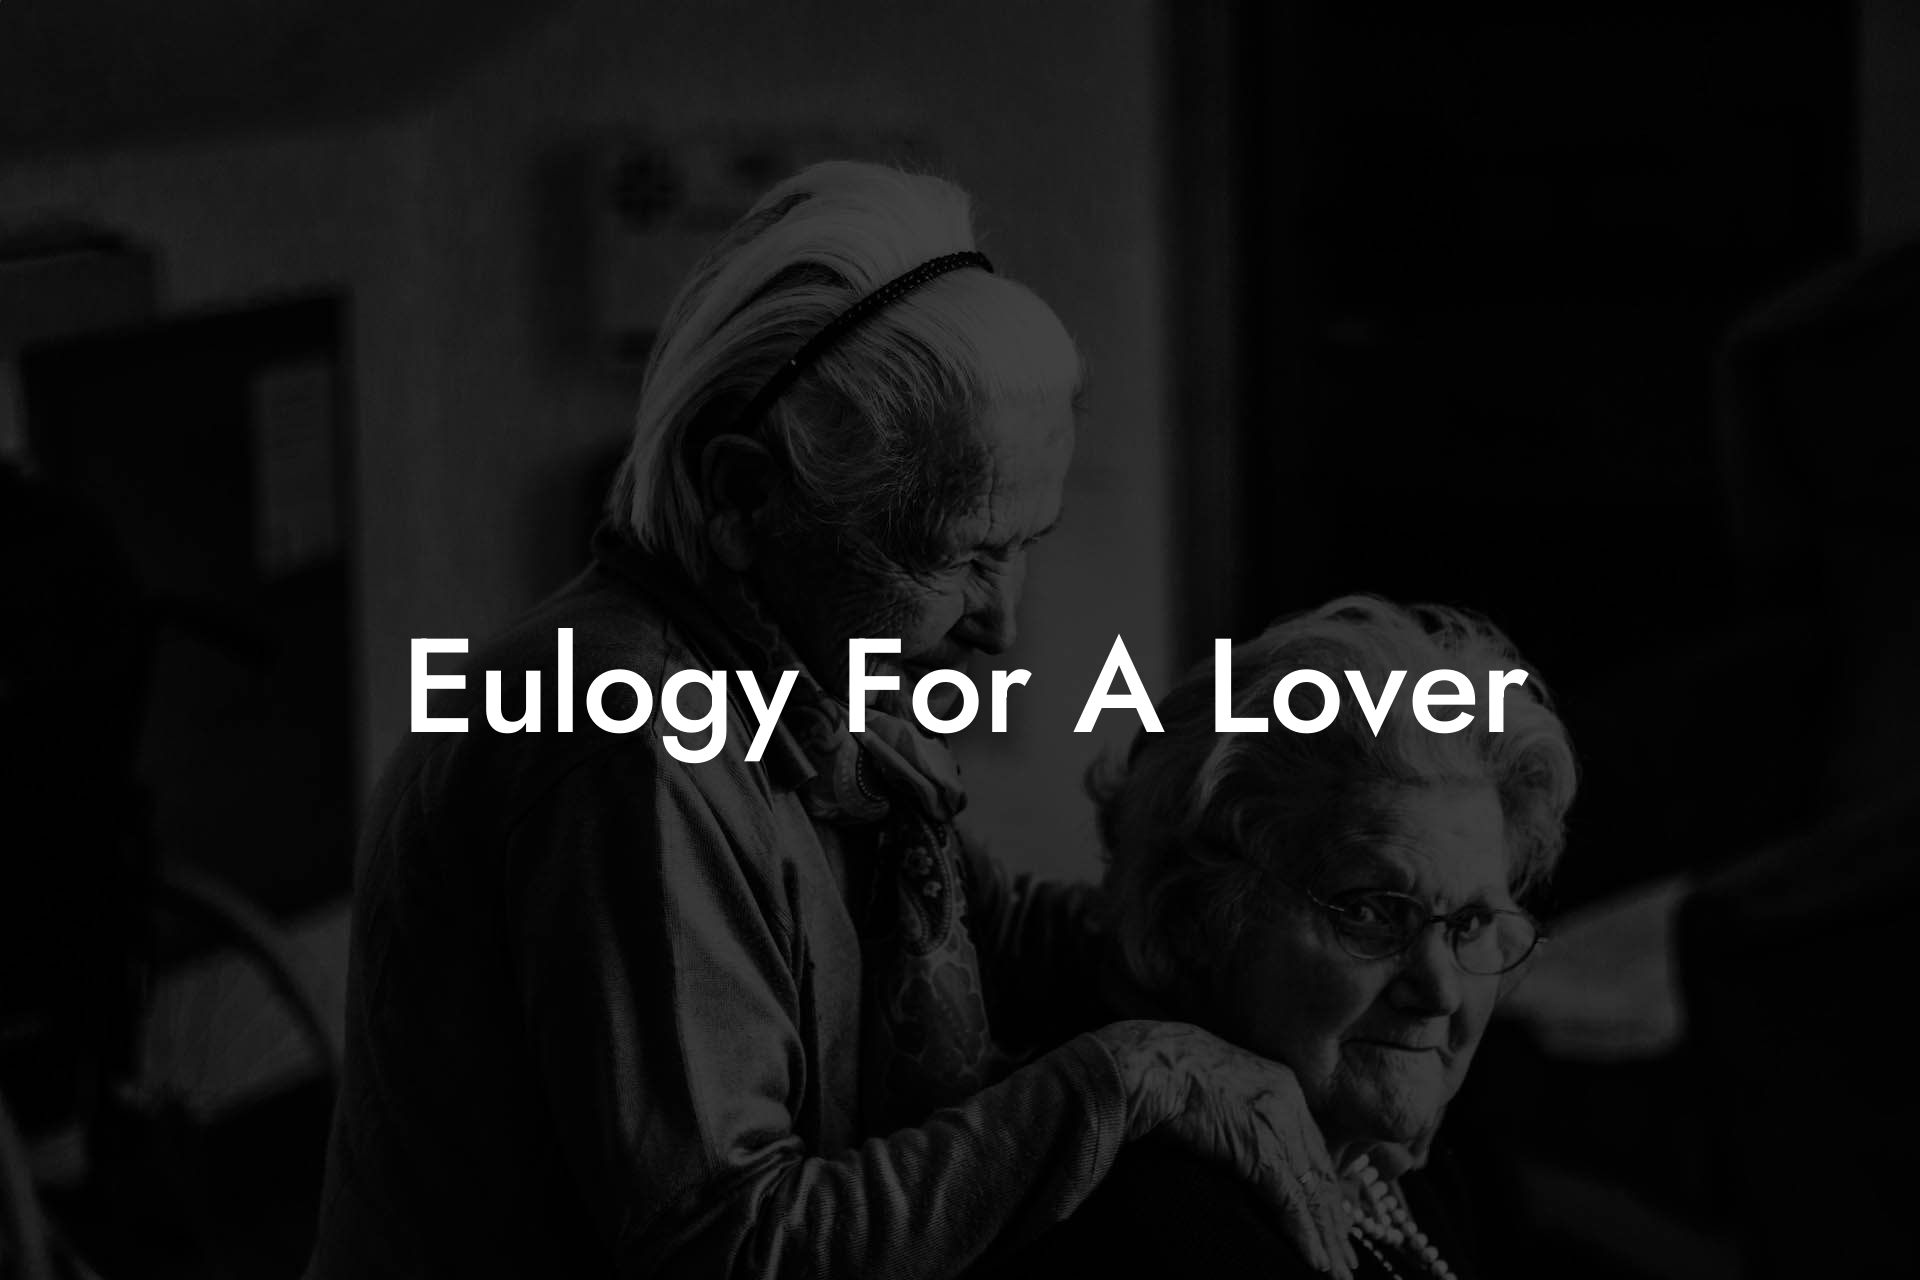 Eulogy For A Lover